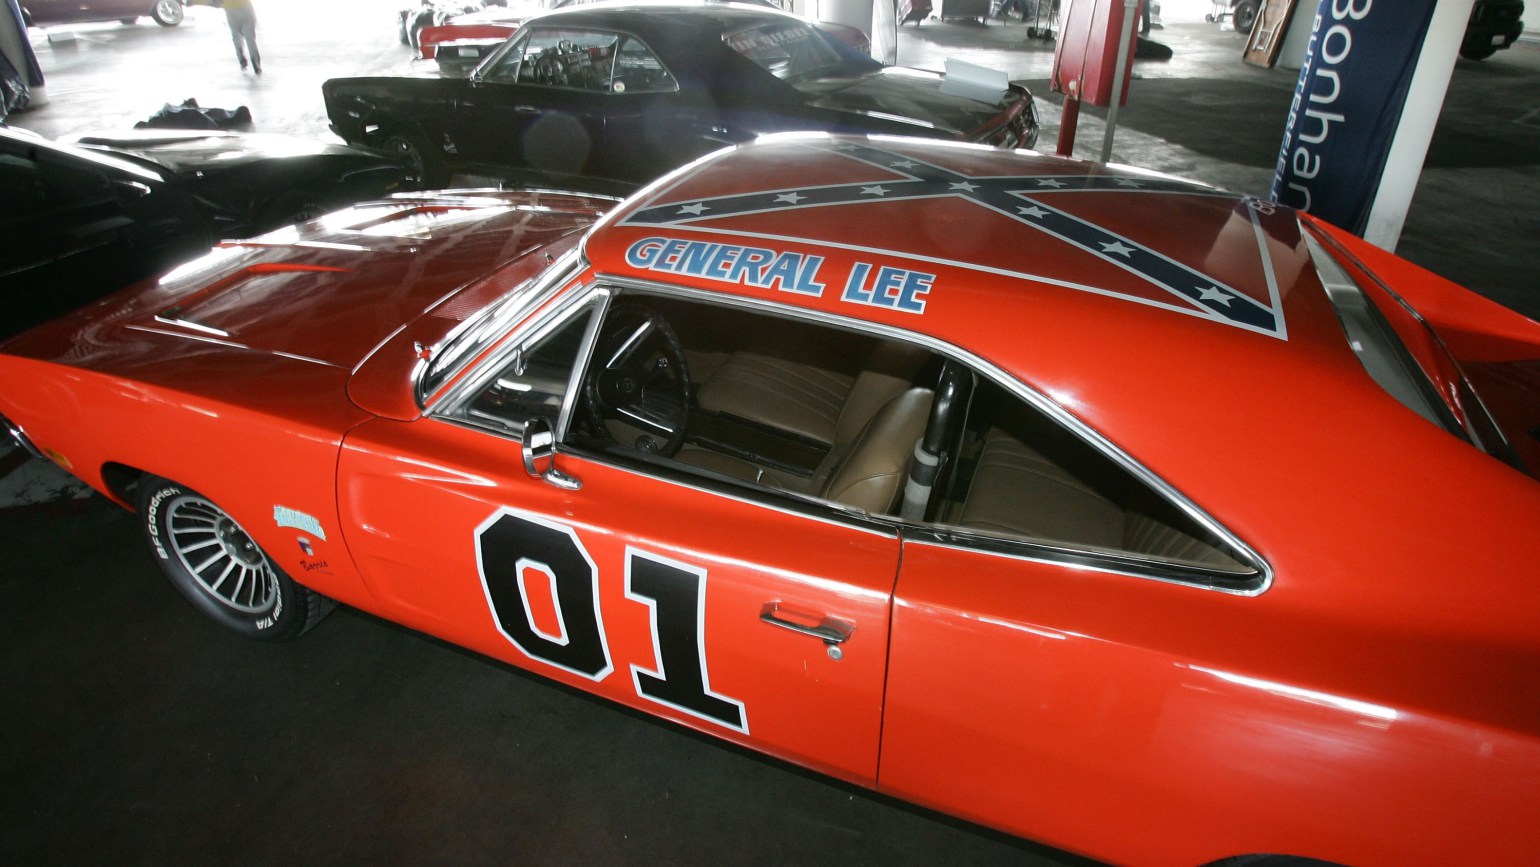 LOS ANGELES - MAY 13:  The "Dukes of Hazzard" General Lee car is displayed at the Barris Star Car Collection Auction at the Petersen Automotive Museum on May 13, 2005 in Los Angeles, California.  (Photo by Frazer Harrison/Getty Images)